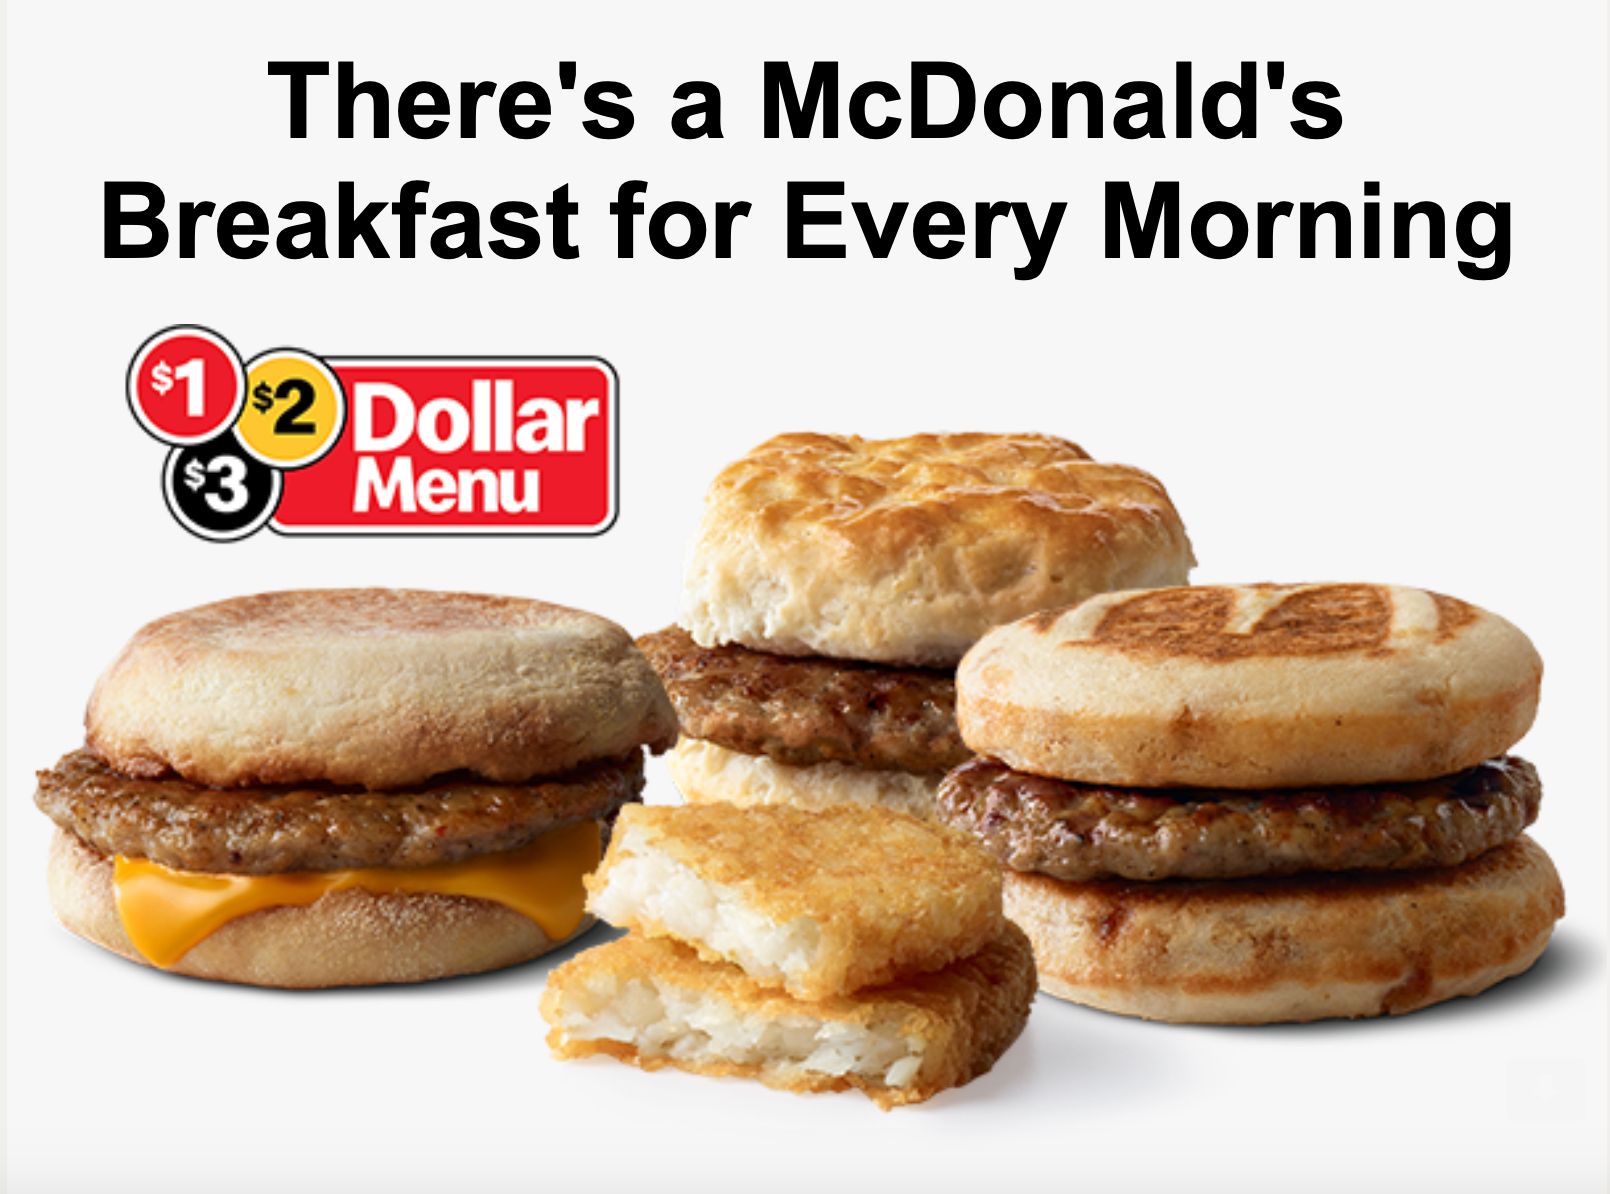 Save on Breakfast with the $1 $2 $3 Dollar Menu at McDonald's 